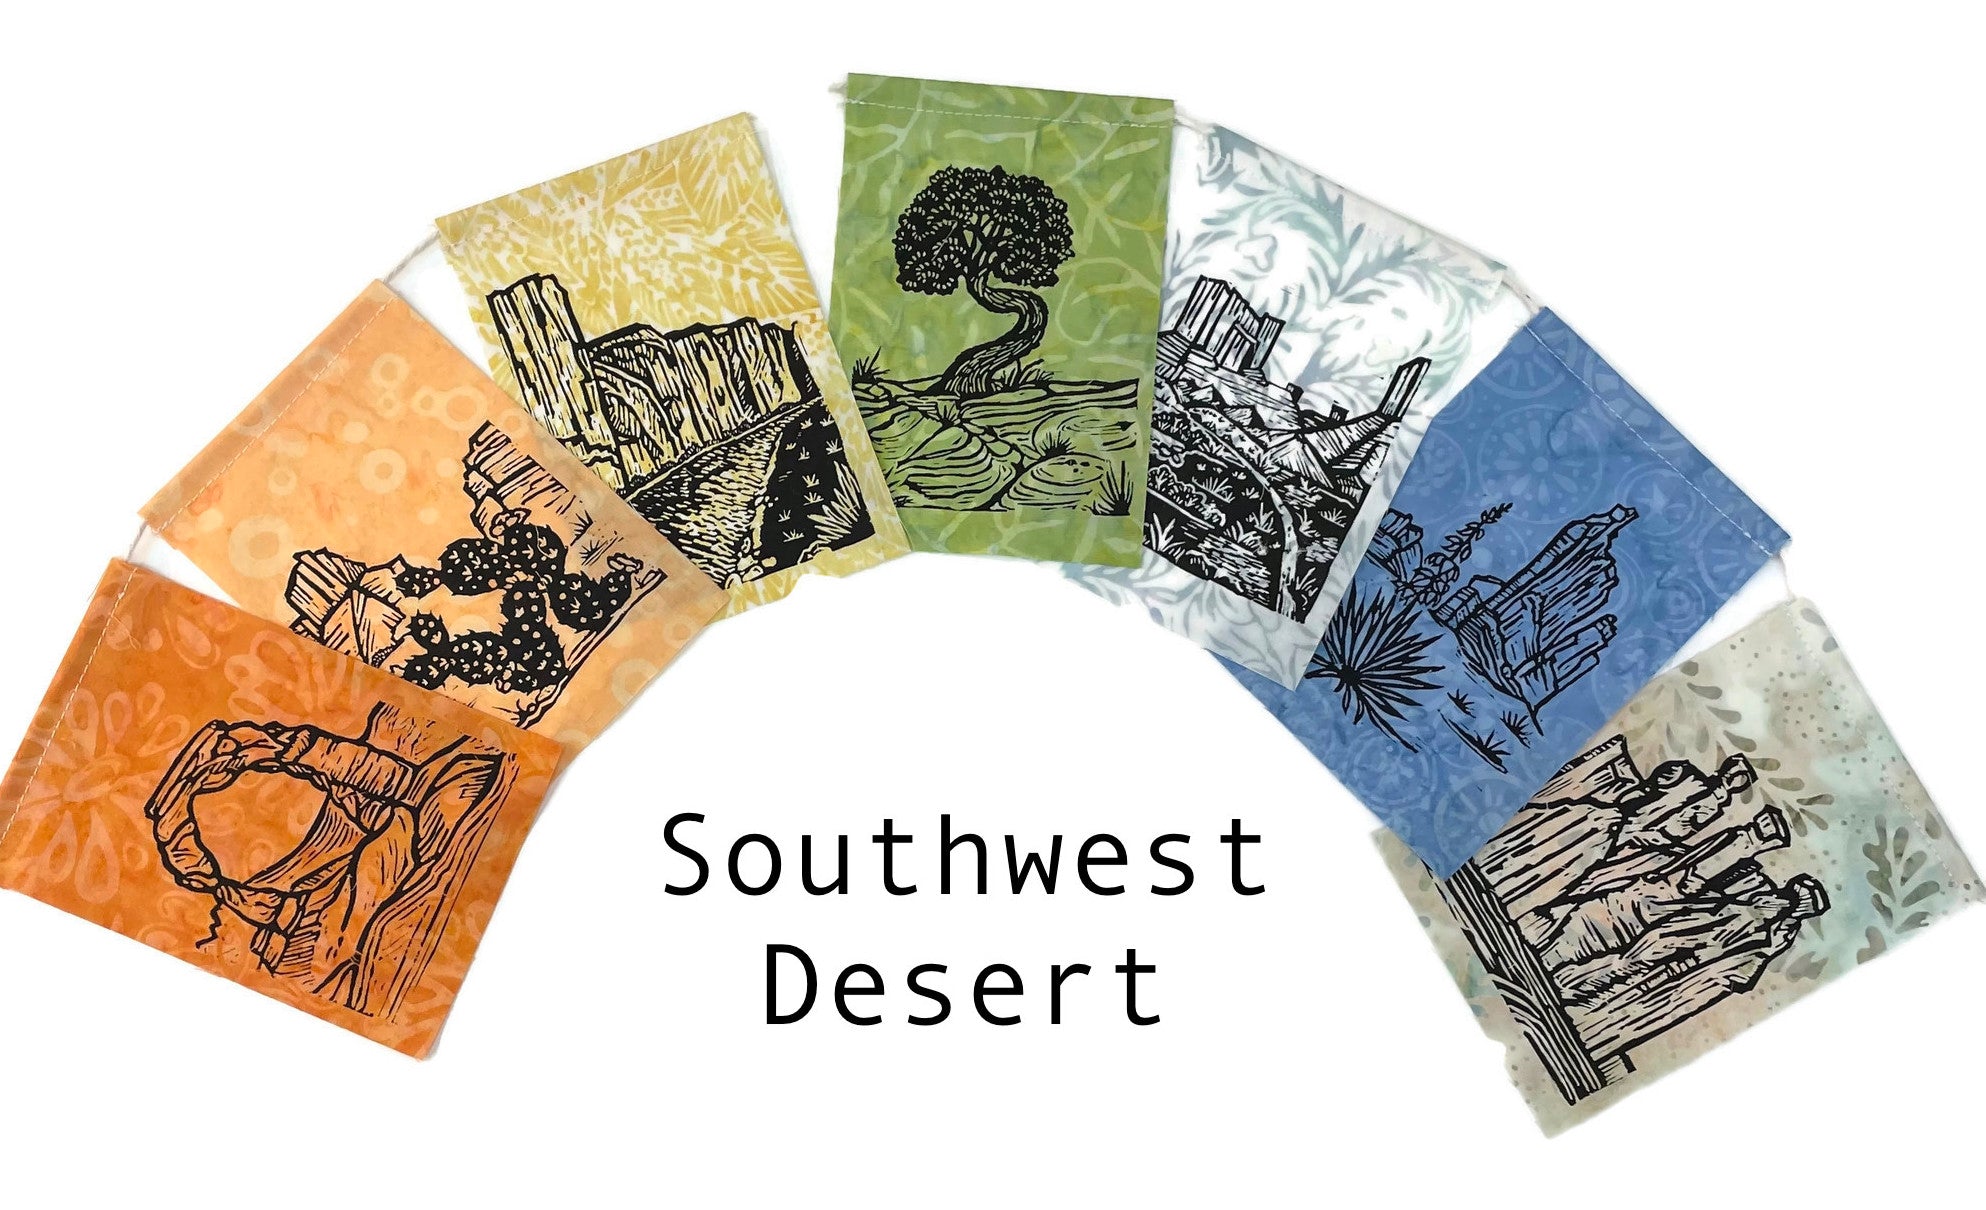 Small Flag Set with images of the desert handprinted on them